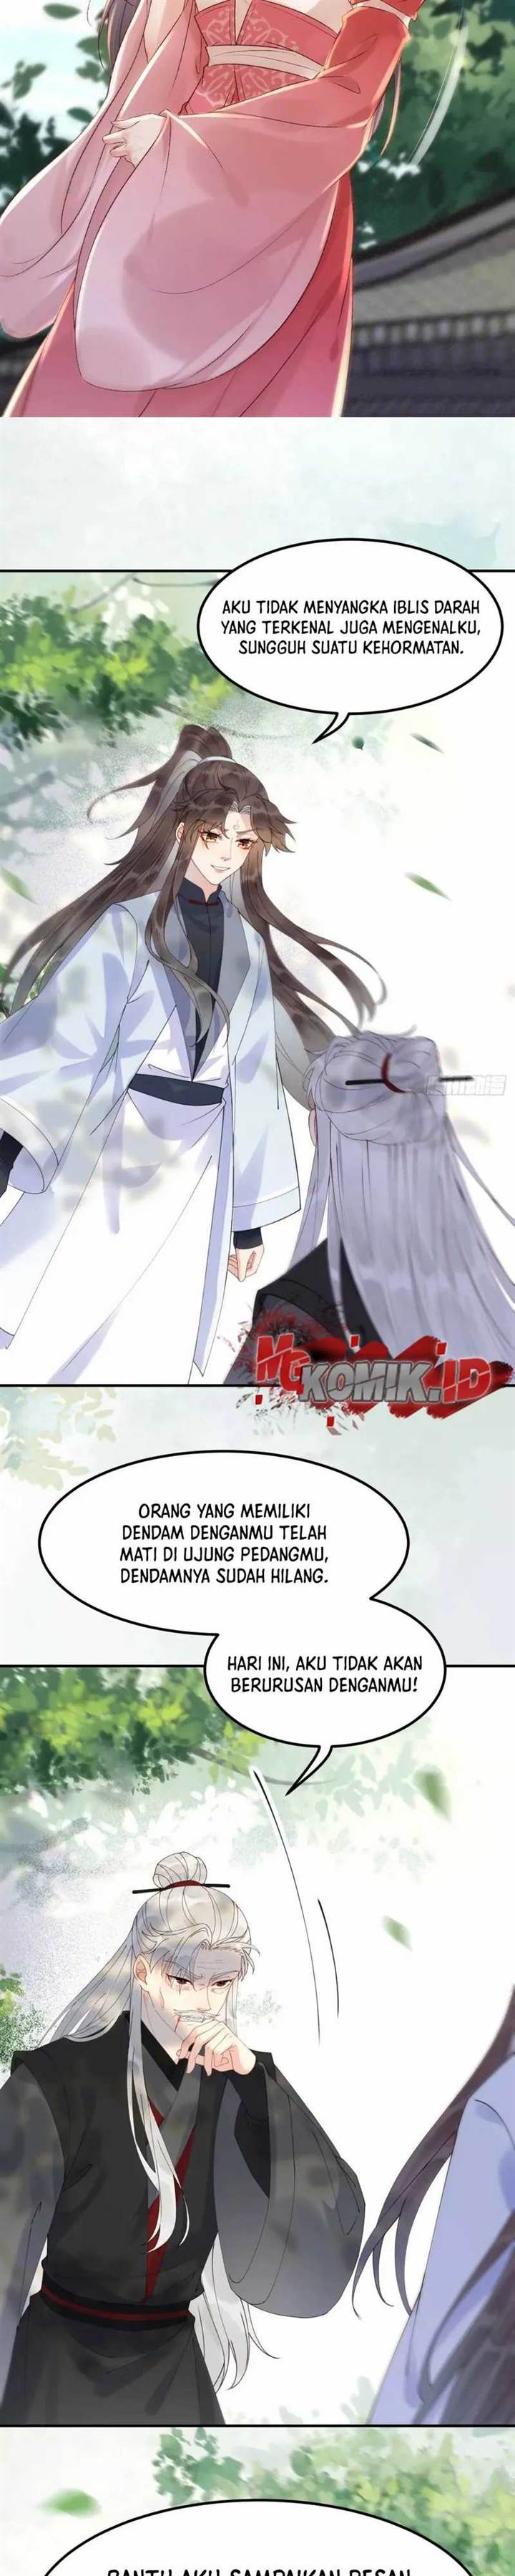 The Ghostly Doctor Chapter 605